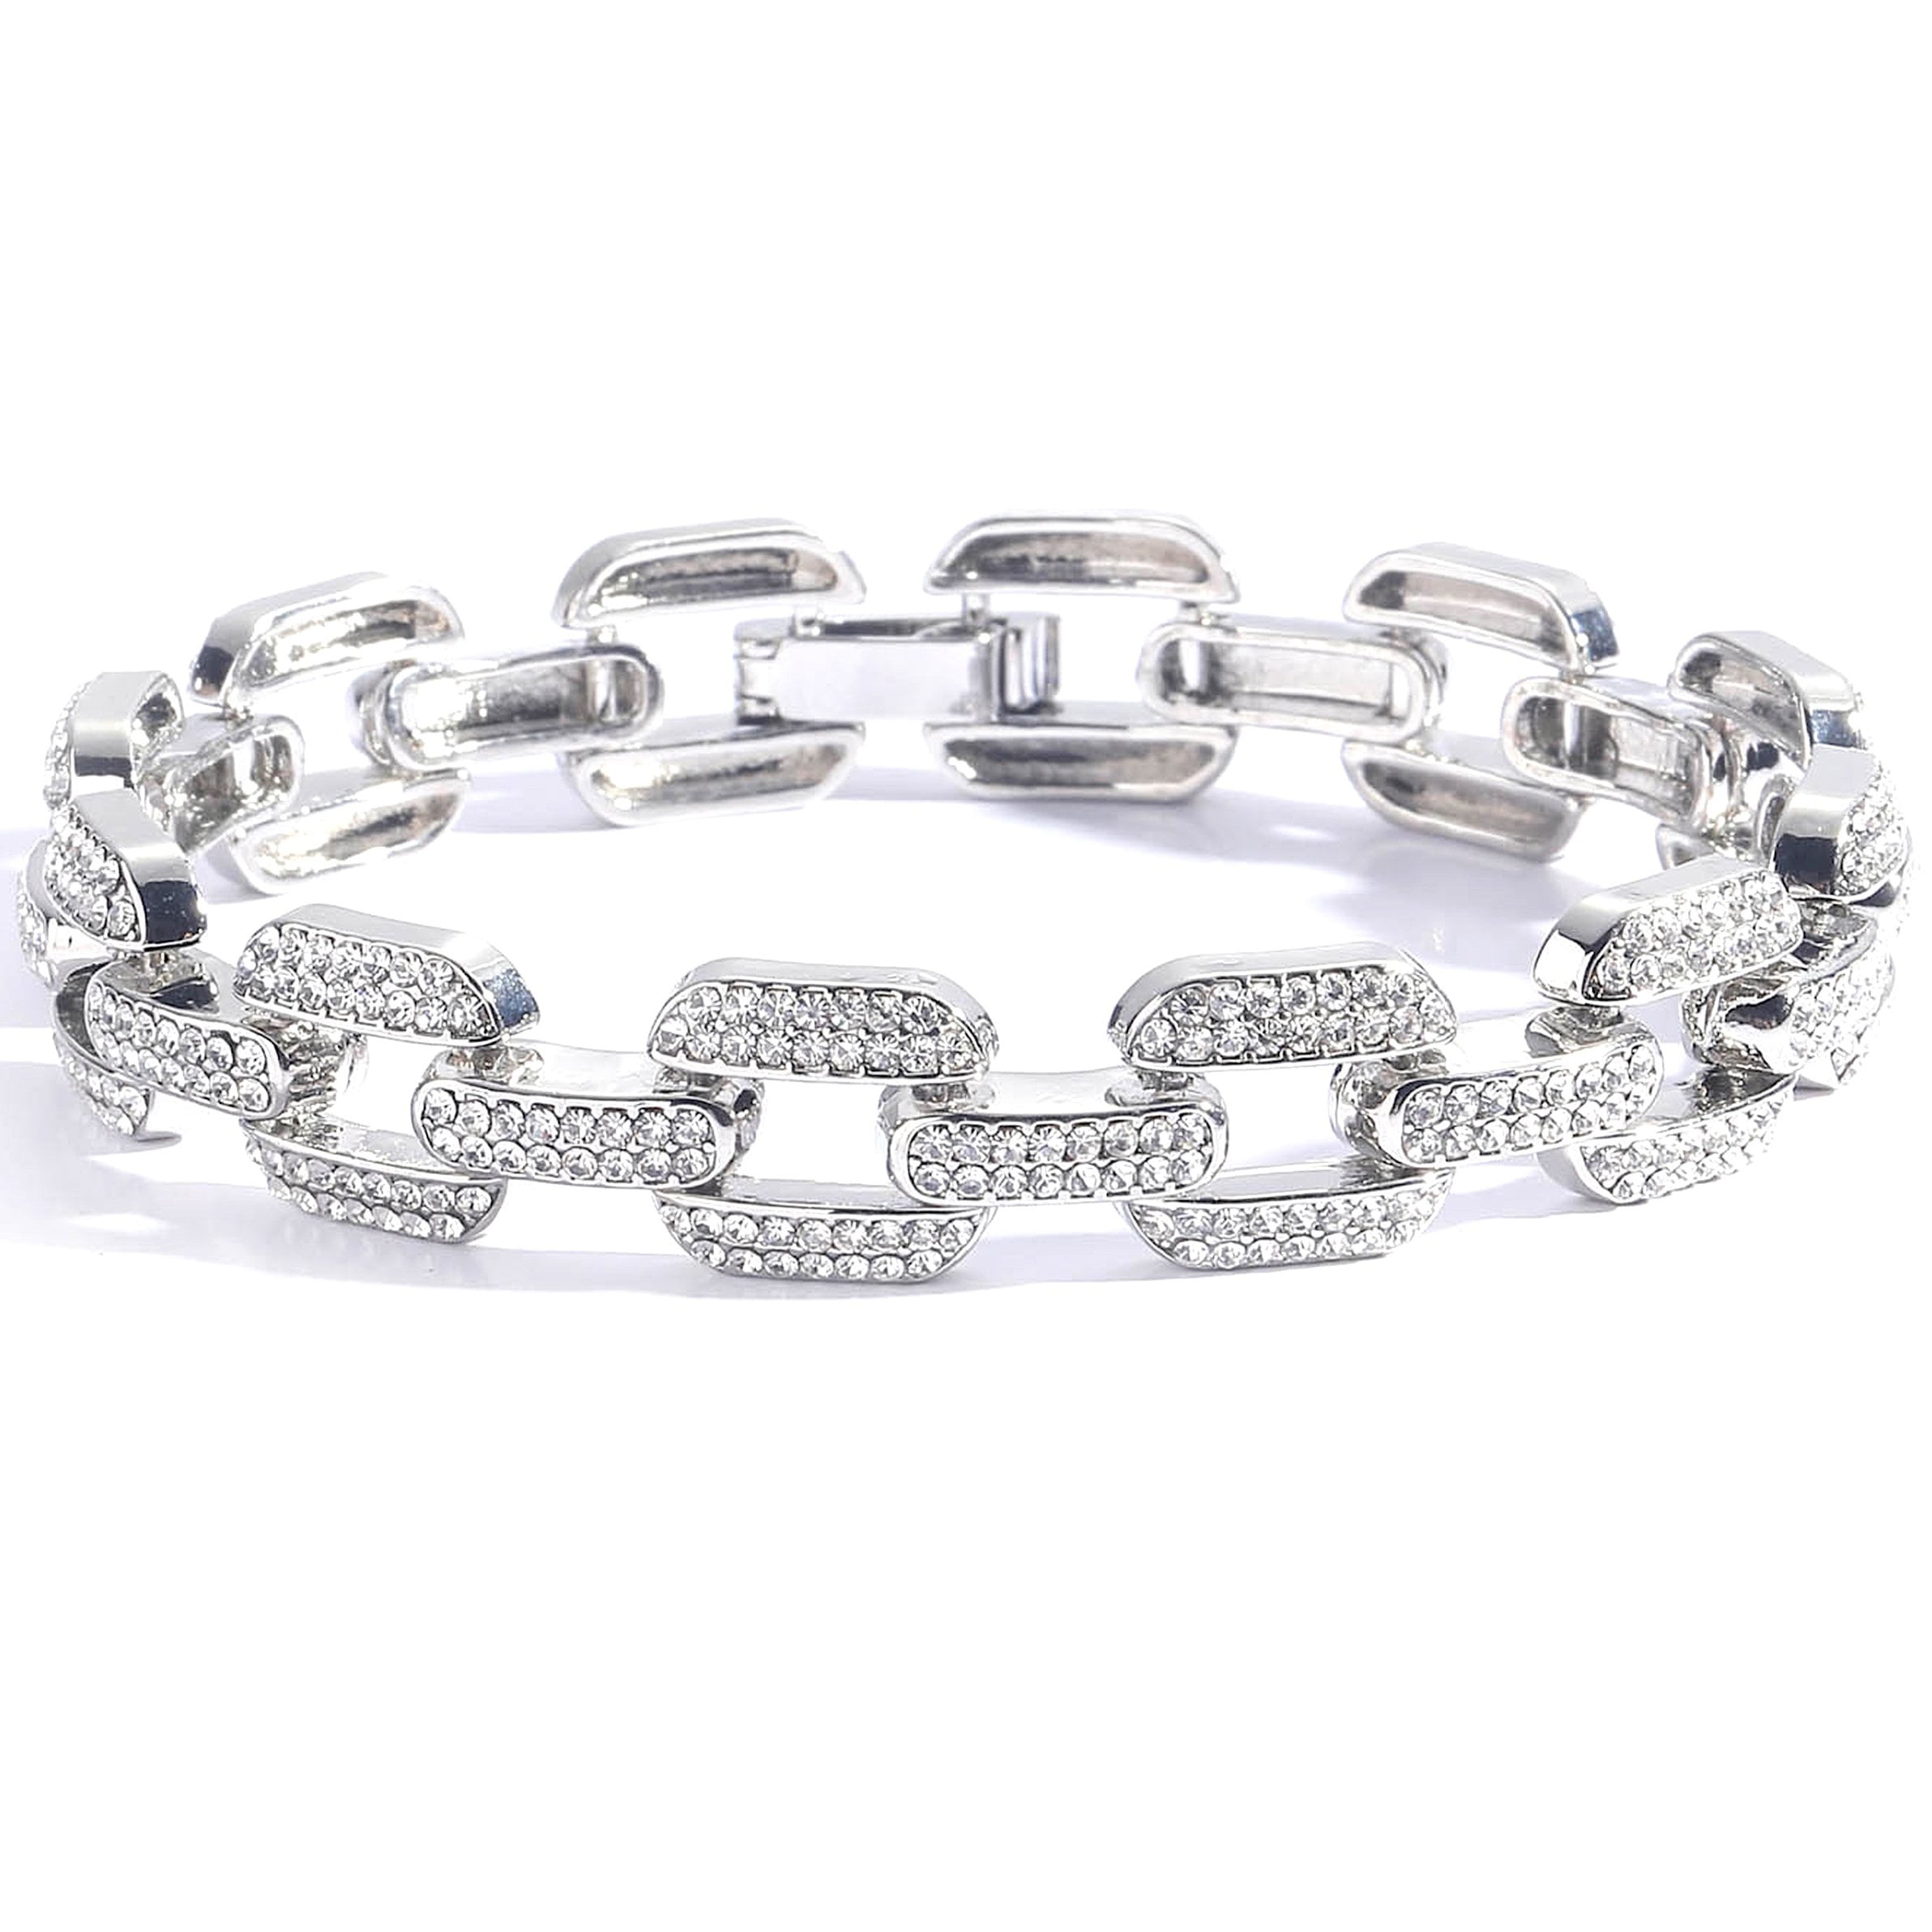 Men's Hip Hop White Gold Plated CZ Iced Out Bar Link Chain Bracelet Necklace 